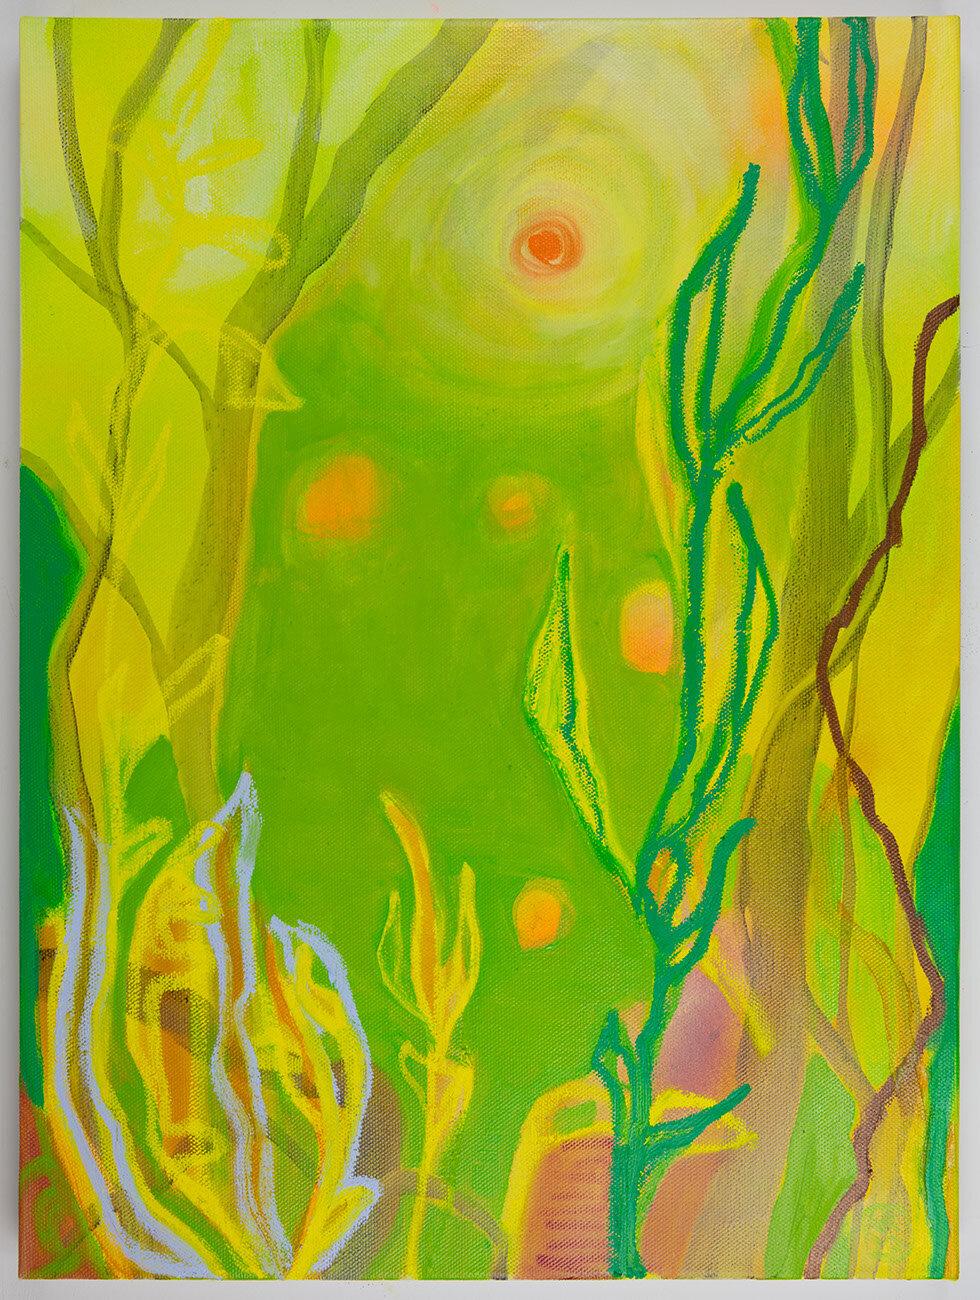 Rachelle Krieger Landscape Painting - Toxic Swamp and Wildflowers, bright green and yellow abstracted landscape